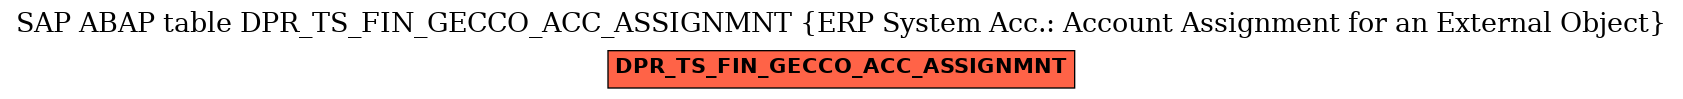 E-R Diagram for table DPR_TS_FIN_GECCO_ACC_ASSIGNMNT (ERP System Acc.: Account Assignment for an External Object)